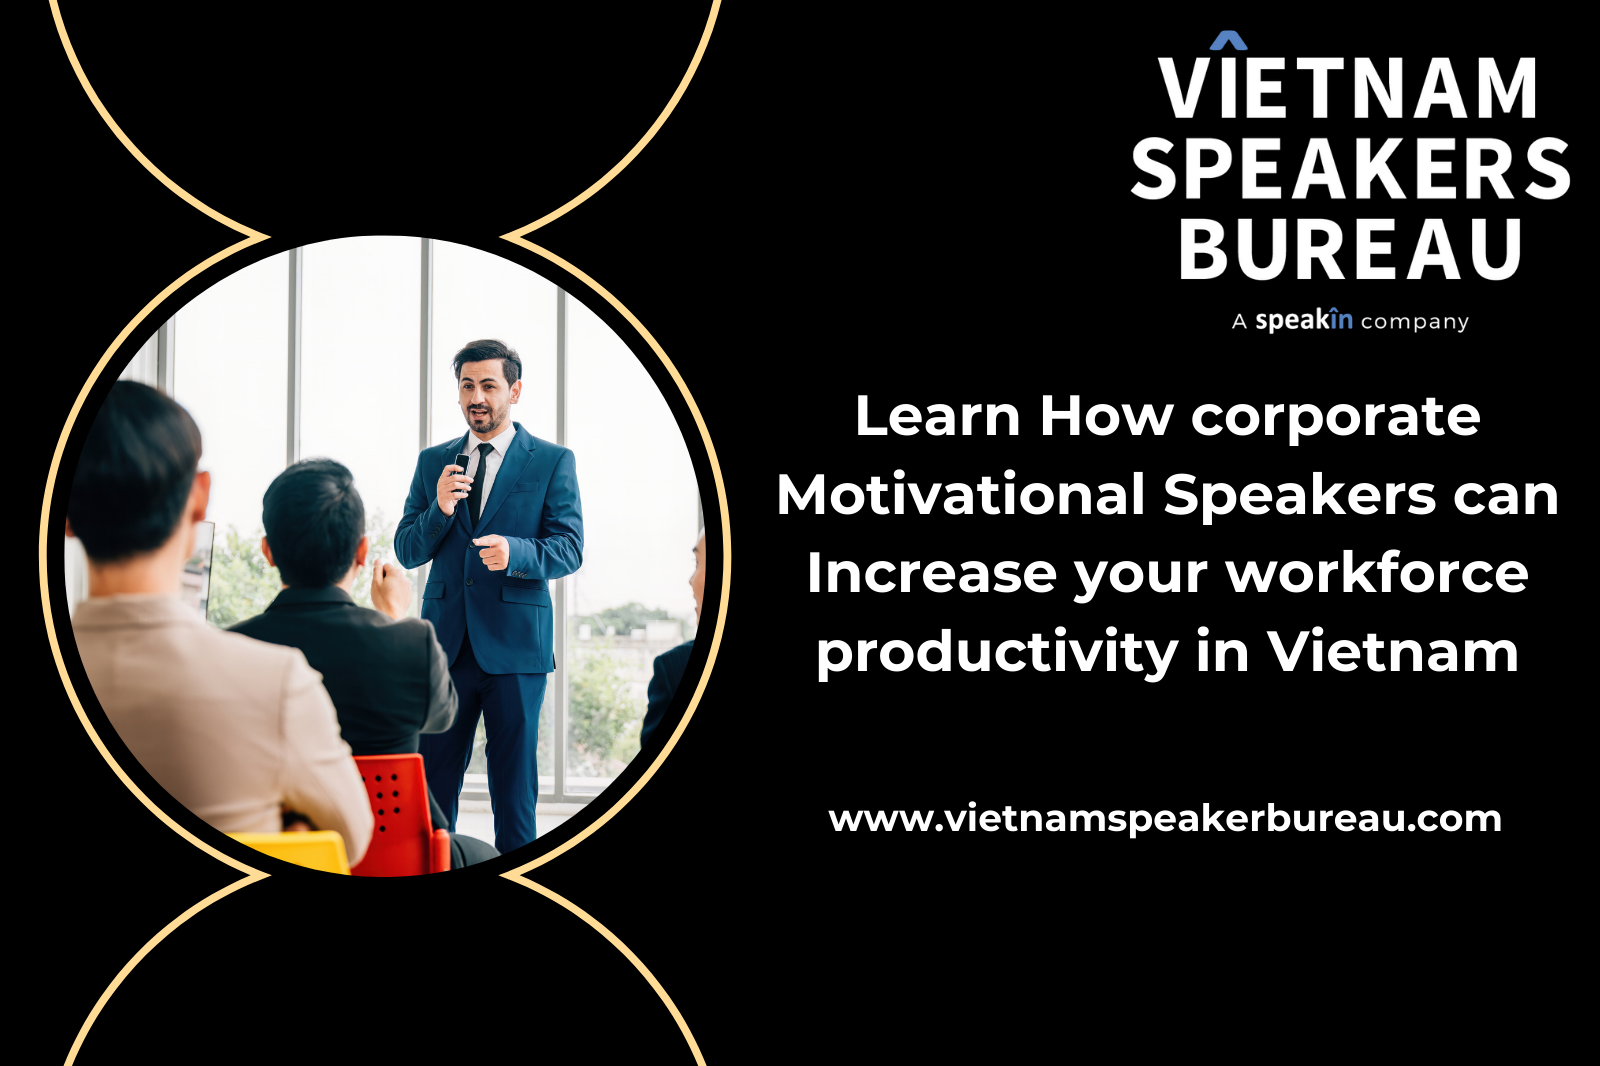 Learn How corporate Motivational Speakers can Increase Your Workforce Productivity in Vietnam